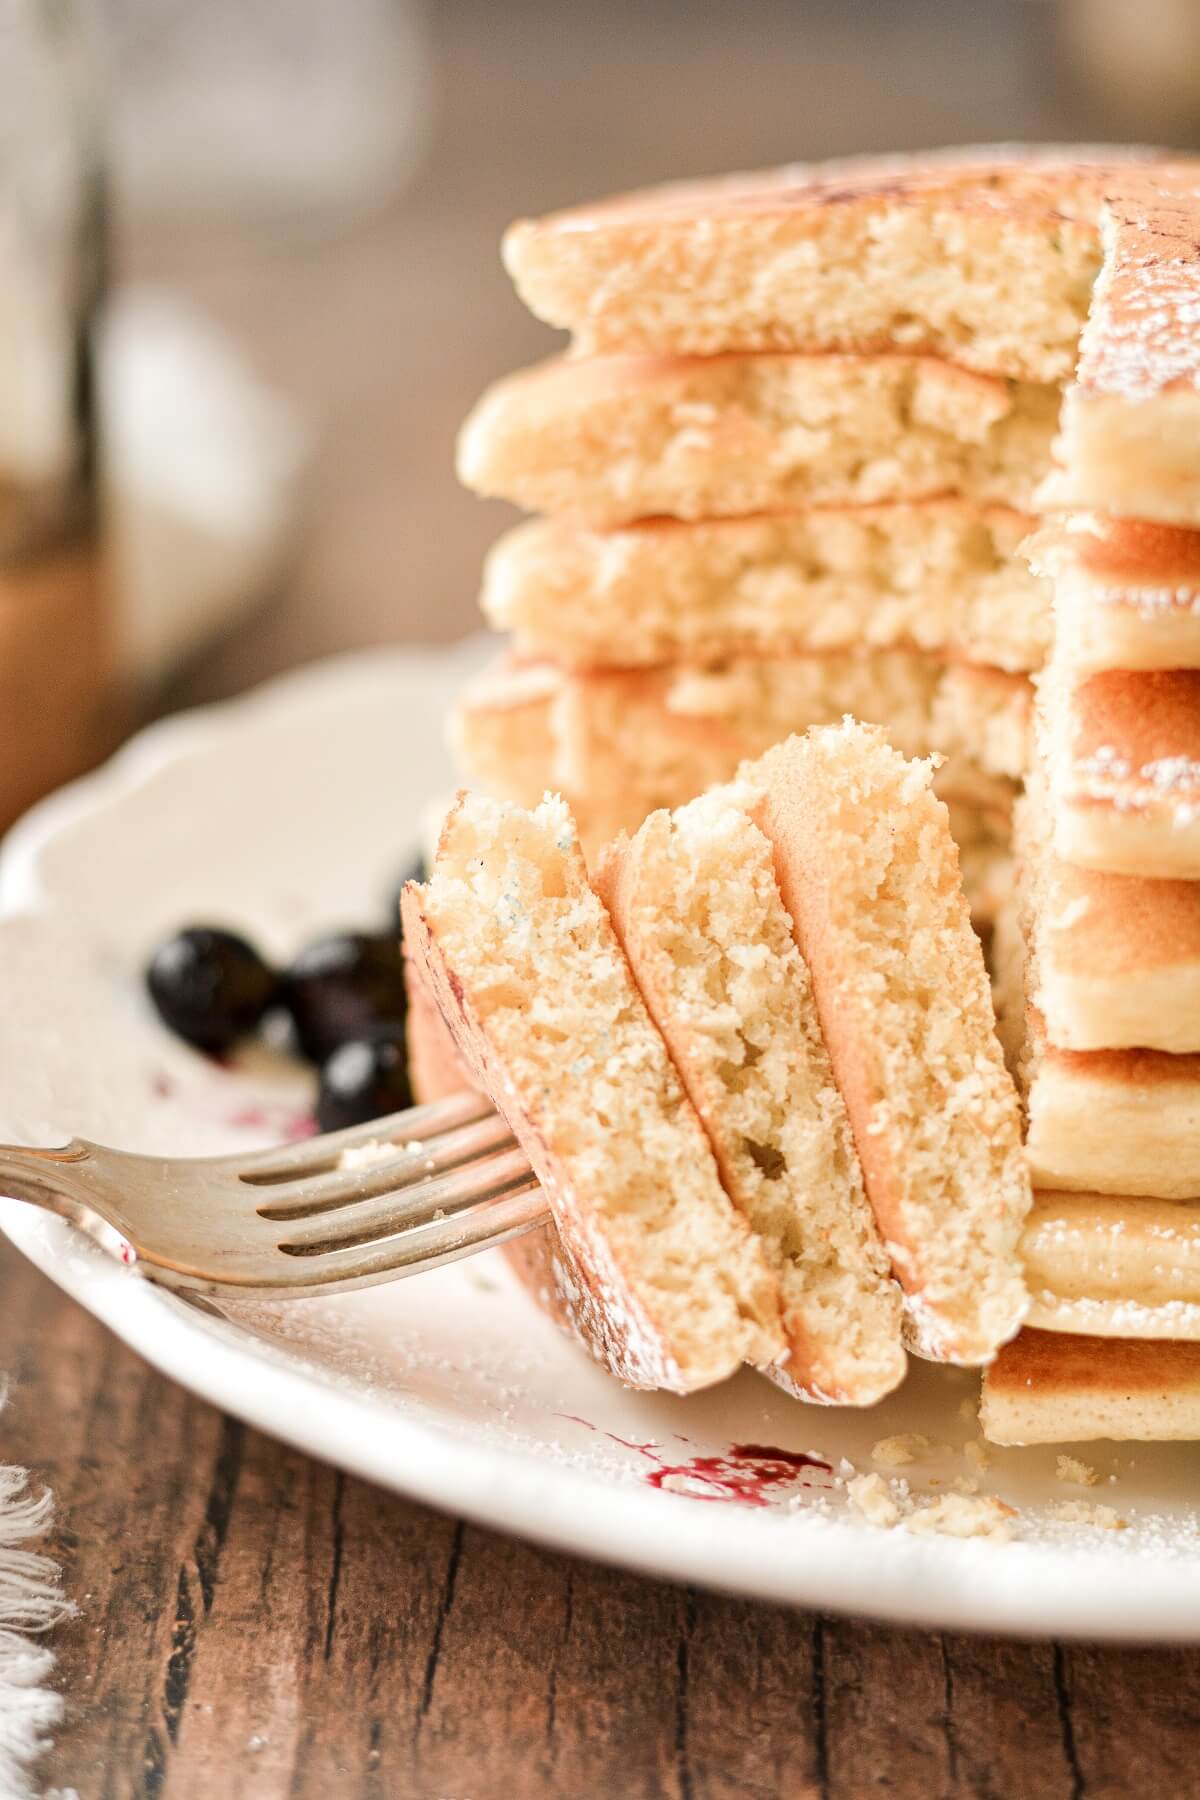 Classic fluffy pancakes, with a bite cut.